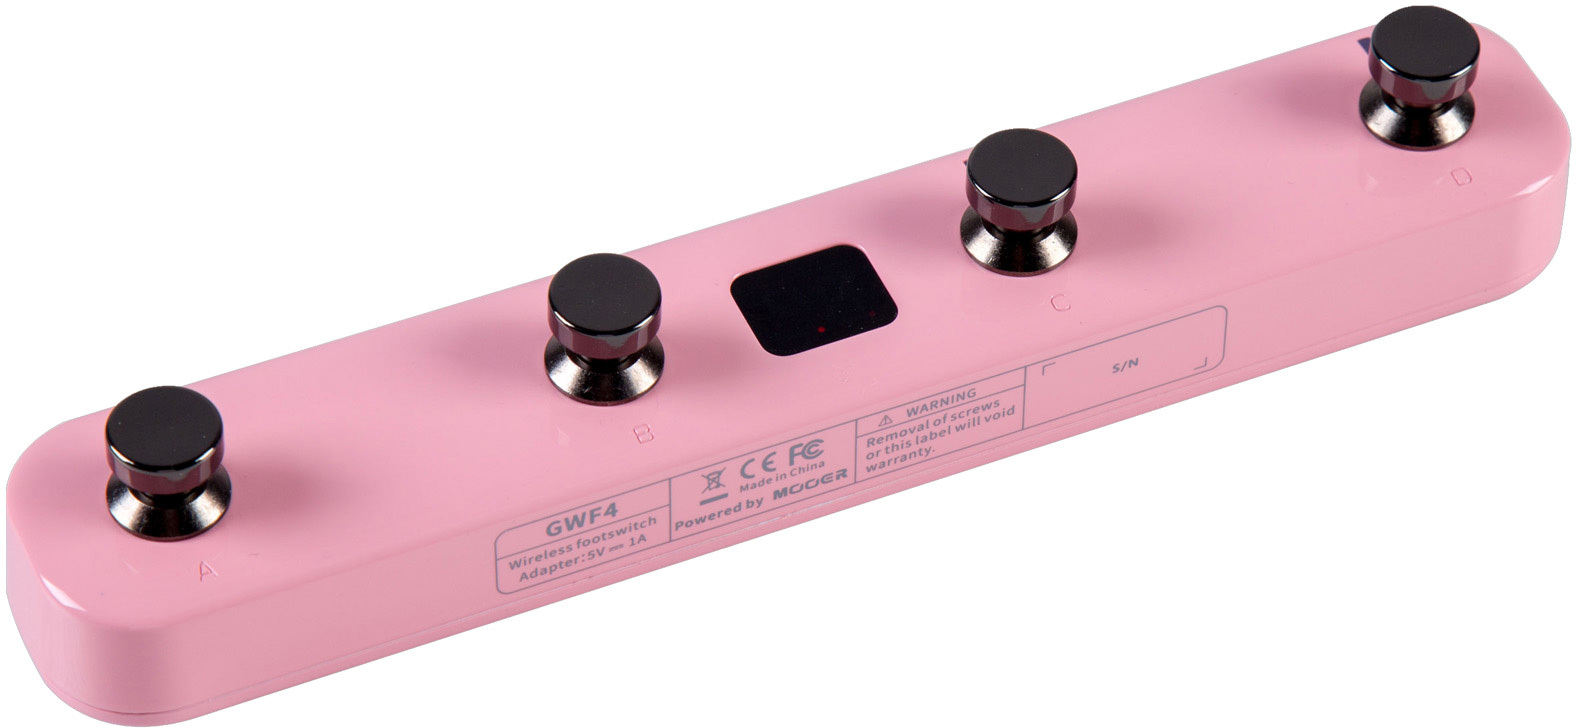 Mooer Gwf4 Gtrs Wireless Footswitch Shell Pink - Volume/boost/expression effect pedaal - Main picture